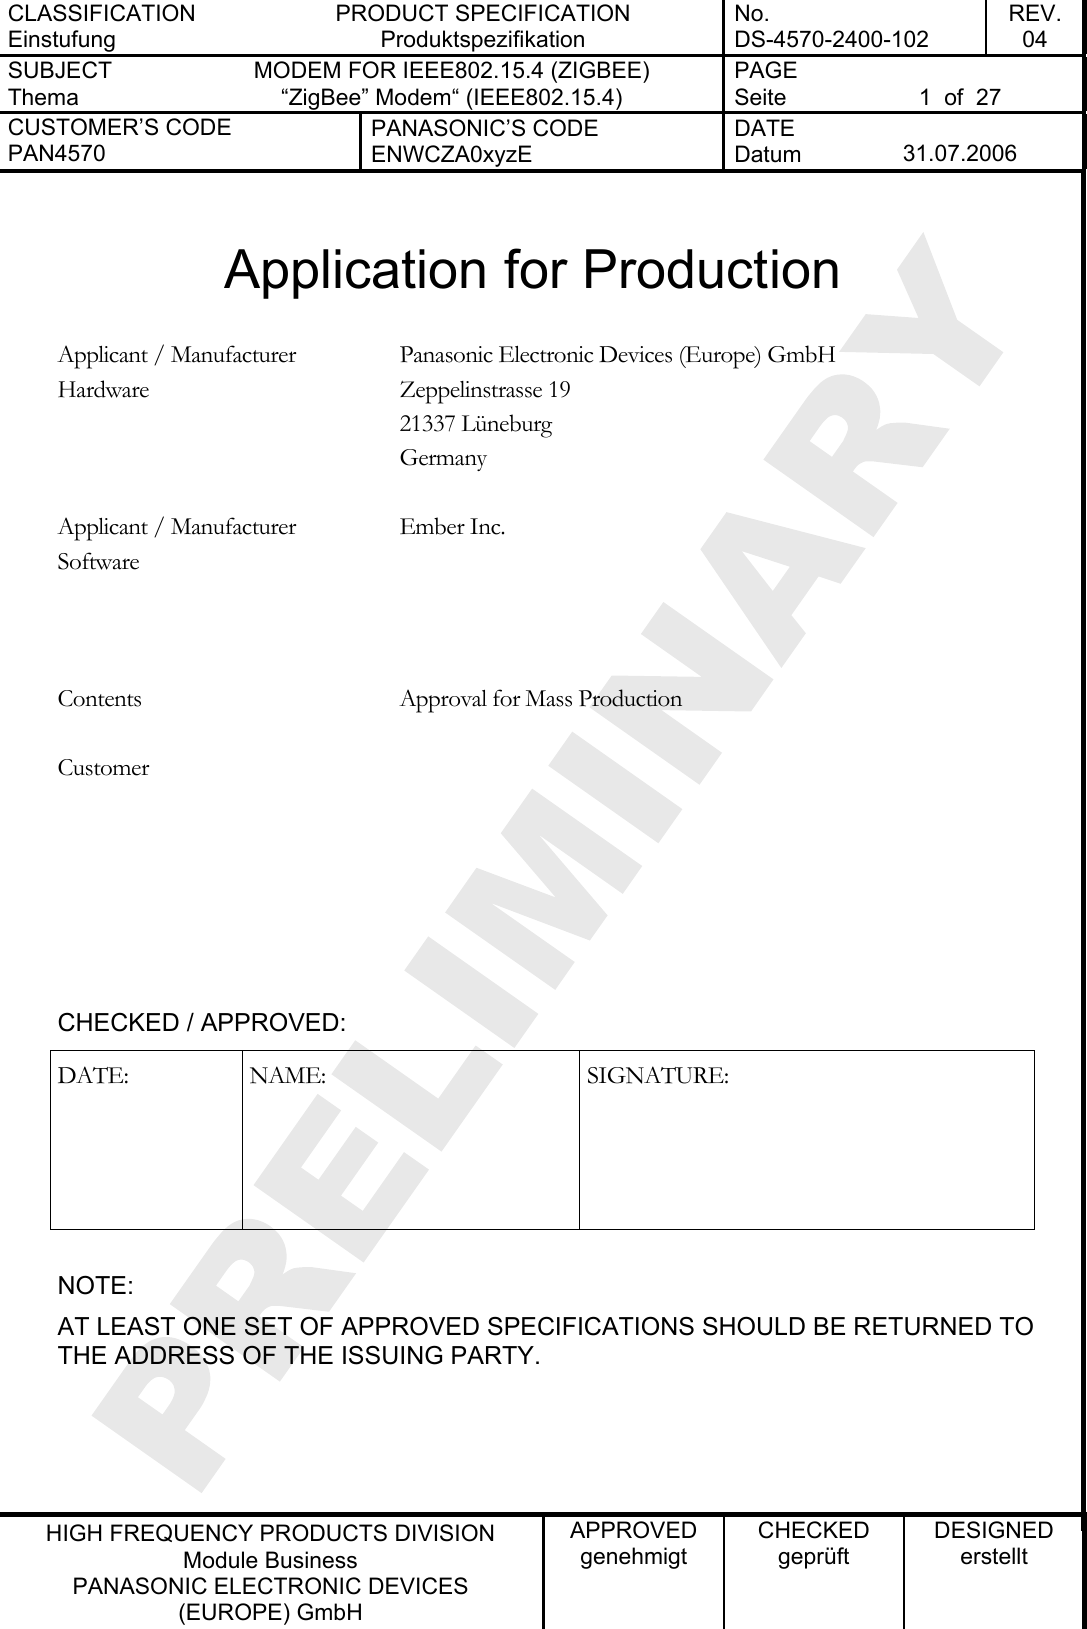 CLASSIFICATION Einstufung PRODUCT SPECIFICATION Produktspezifikation No. DS-4570-2400-102 REV. 04 SUBJECT Thema MODEM FOR IEEE802.15.4 (ZIGBEE) “ZigBee” Modem“ (IEEE802.15.4)   PAGE Seite  1  of  27 CUSTOMER’S CODE PAN4570 PANASONIC’S CODE ENWCZA0xyzE DATE Datum  31.07.2006   HIGH FREQUENCY PRODUCTS DIVISION Module Business PANASONIC ELECTRONIC DEVICES  (EUROPE) GmbH APPROVED genehmigt CHECKED geprüft DESIGNED erstellt  Application for Production  Panasonic Electronic Devices (Europe) GmbH Zeppelinstrasse 19 21337 Lüneburg Applicant / Manufacturer Hardware Germany   Ember Inc.   Applicant / Manufacturer Software    Contents  Approval for Mass Production      Customer      CHECKED / APPROVED: DATE: NAME:  SIGNATURE:  NOTE: AT LEAST ONE SET OF APPROVED SPECIFICATIONS SHOULD BE RETURNED TO THE ADDRESS OF THE ISSUING PARTY.   